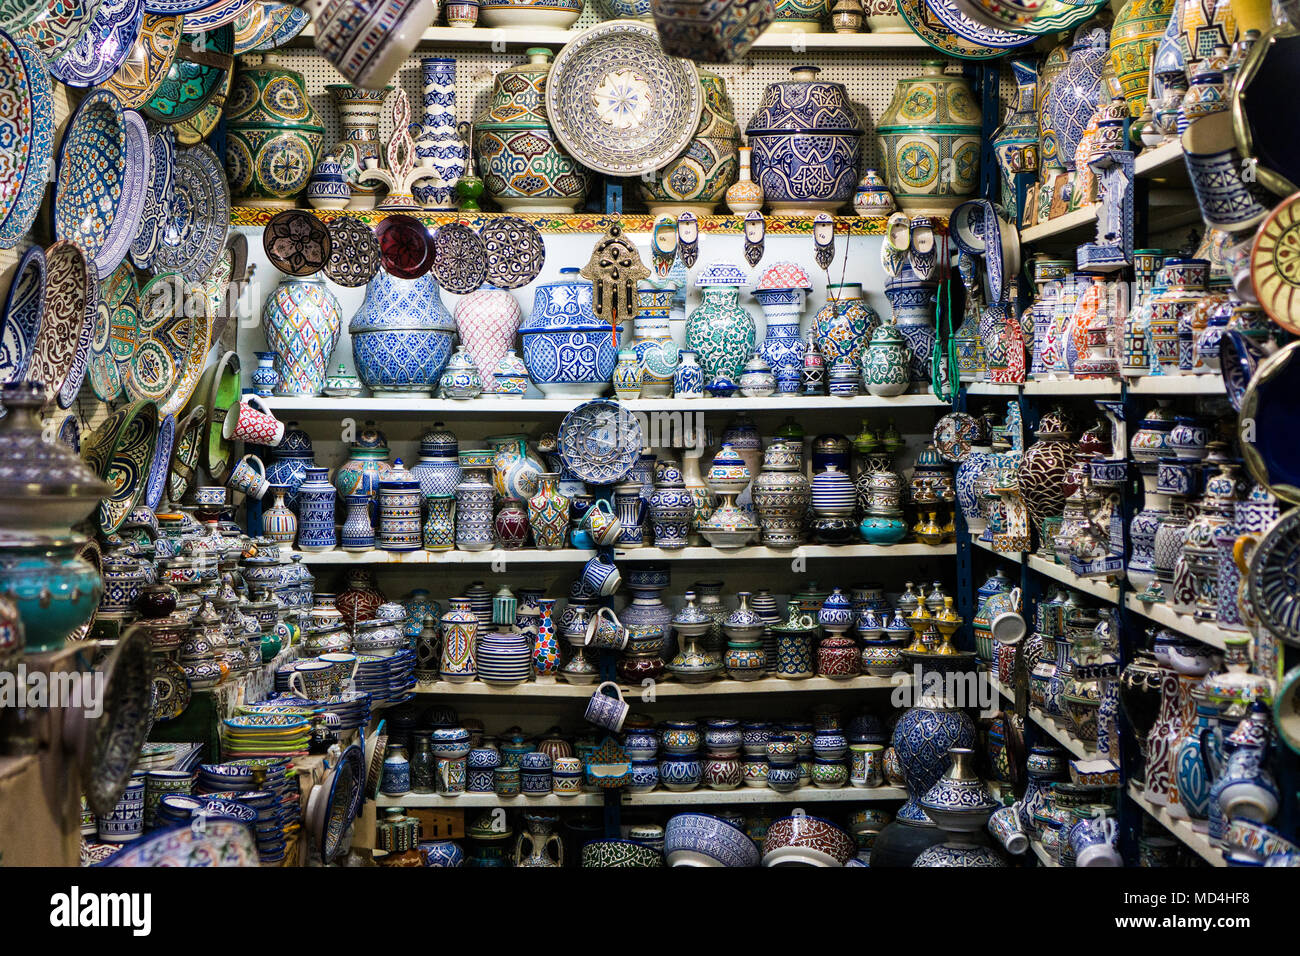 Moroccan shop with handmade ceramic souvenirs, vases, plates and other handicrafts Stock Photo